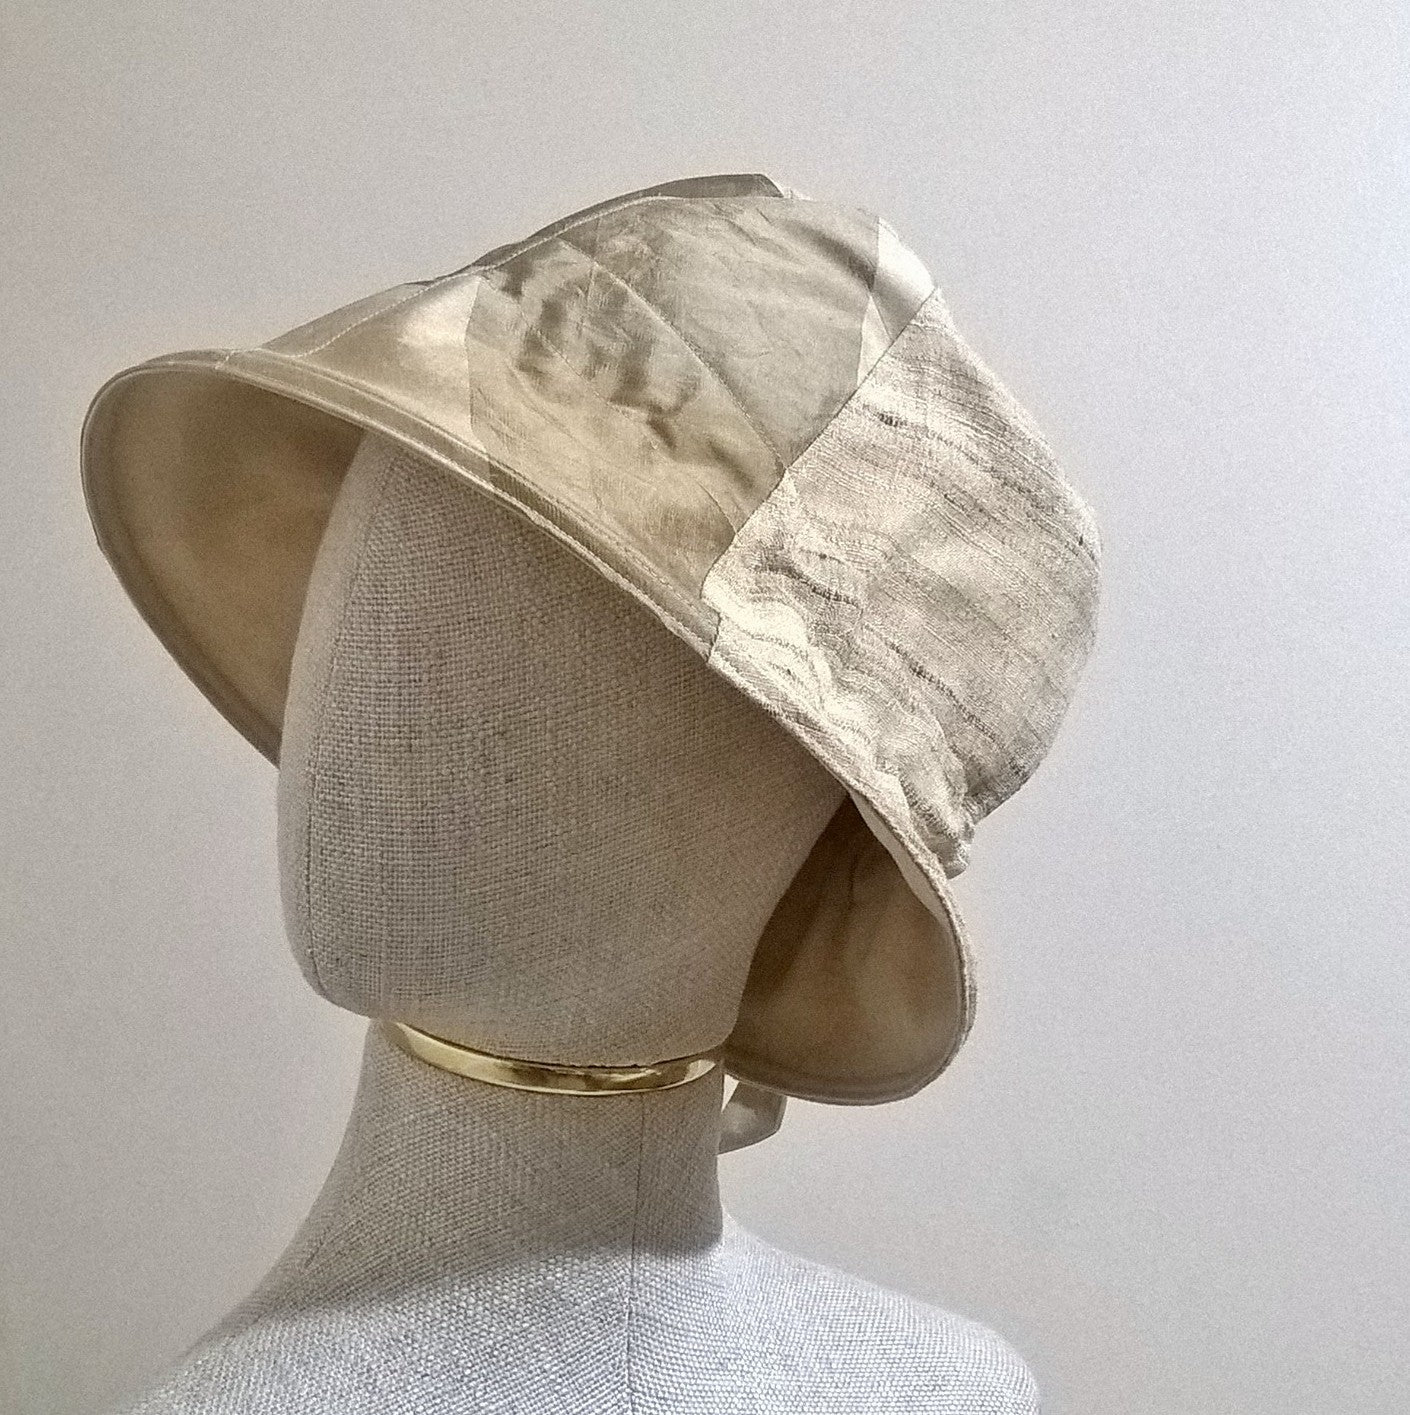 Silk bucket hat in neutral tones of beige taupe and gold